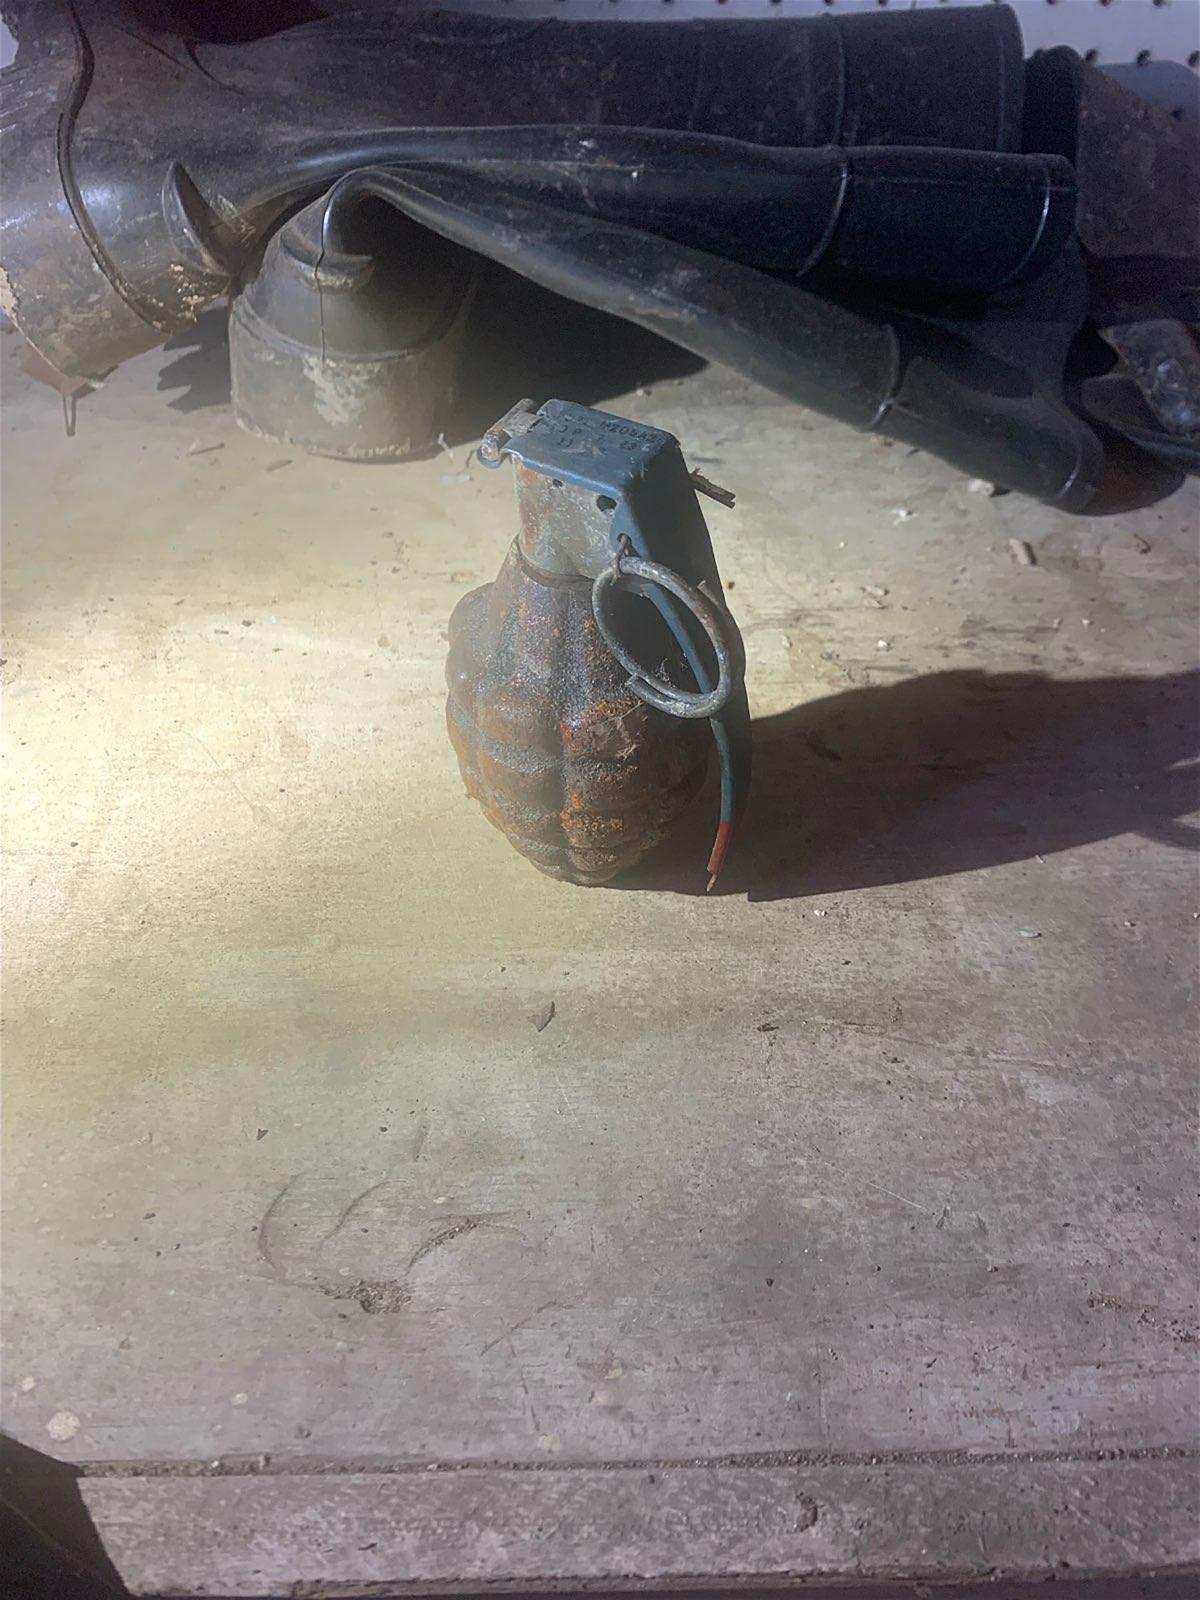 <i>Cook County Sheriff's Office</i><br/>The Cook County Bomb Squad identified the device as likely a WWII-era training grenade.